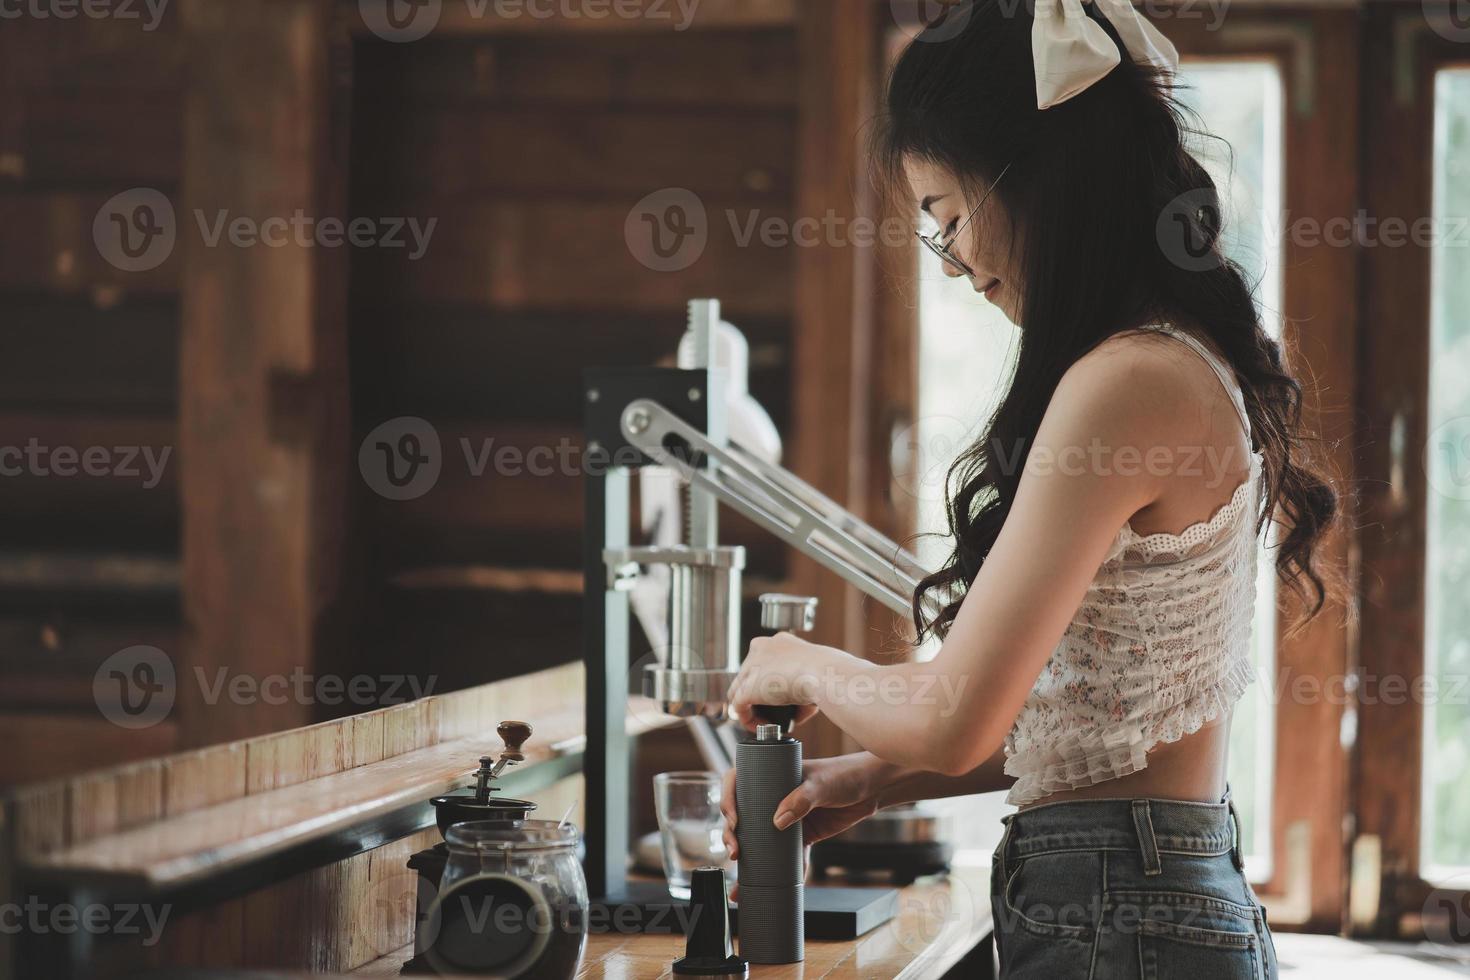 https://static.vecteezy.com/system/resources/previews/010/508/706/non_2x/barista-cafe-making-coffee-with-manual-lever-espresso-machine-preparation-service-concept-in-restaurant-close-up-hand-barista-making-fresh-coffee-with-coffee-machine-in-the-cafe-making-fresh-coffee-photo.jpg